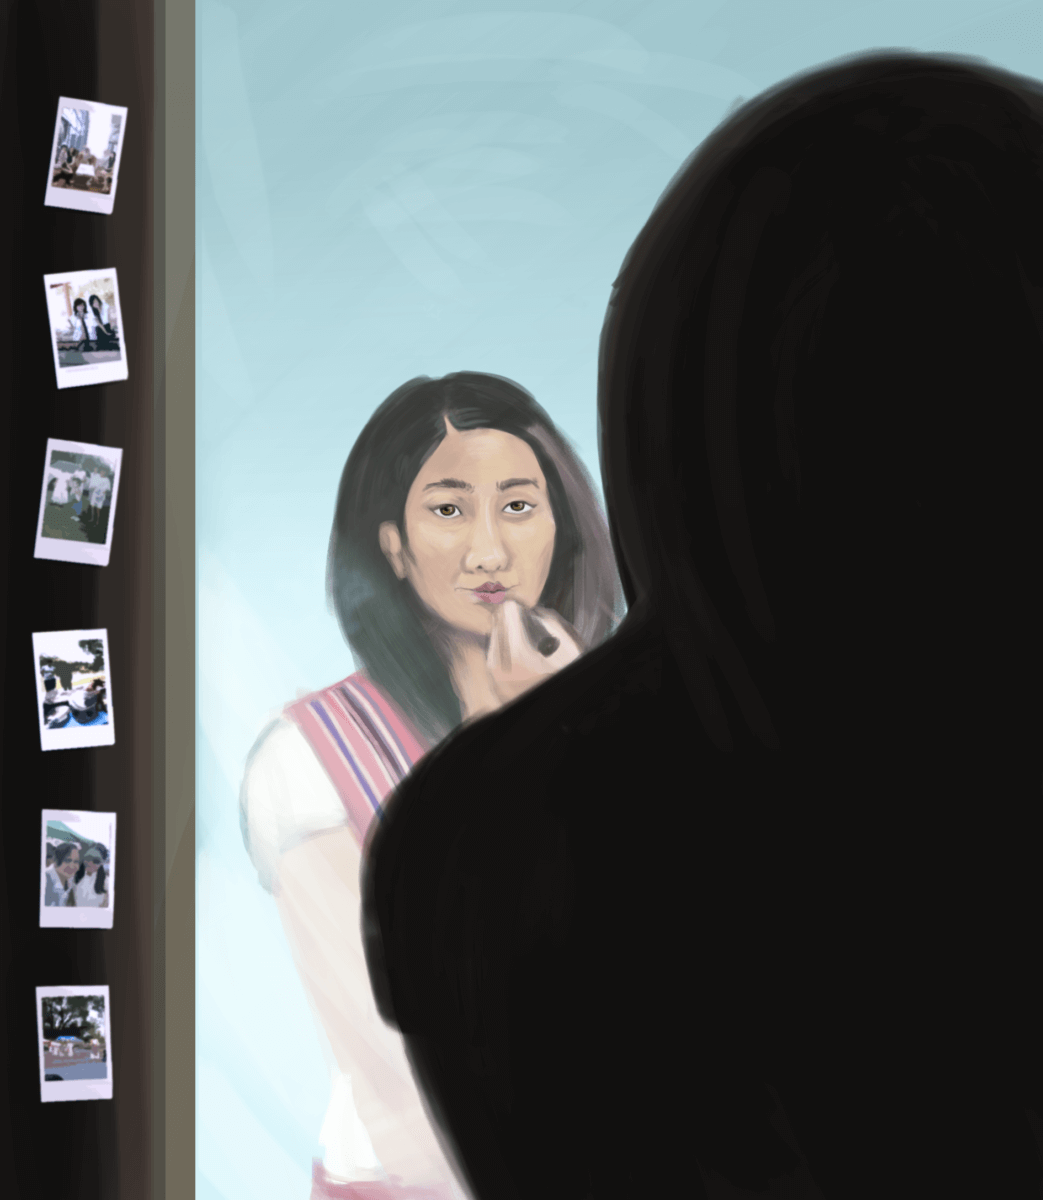 painting of a girl looking at her reflection in the mirror, with polariods on the side of the